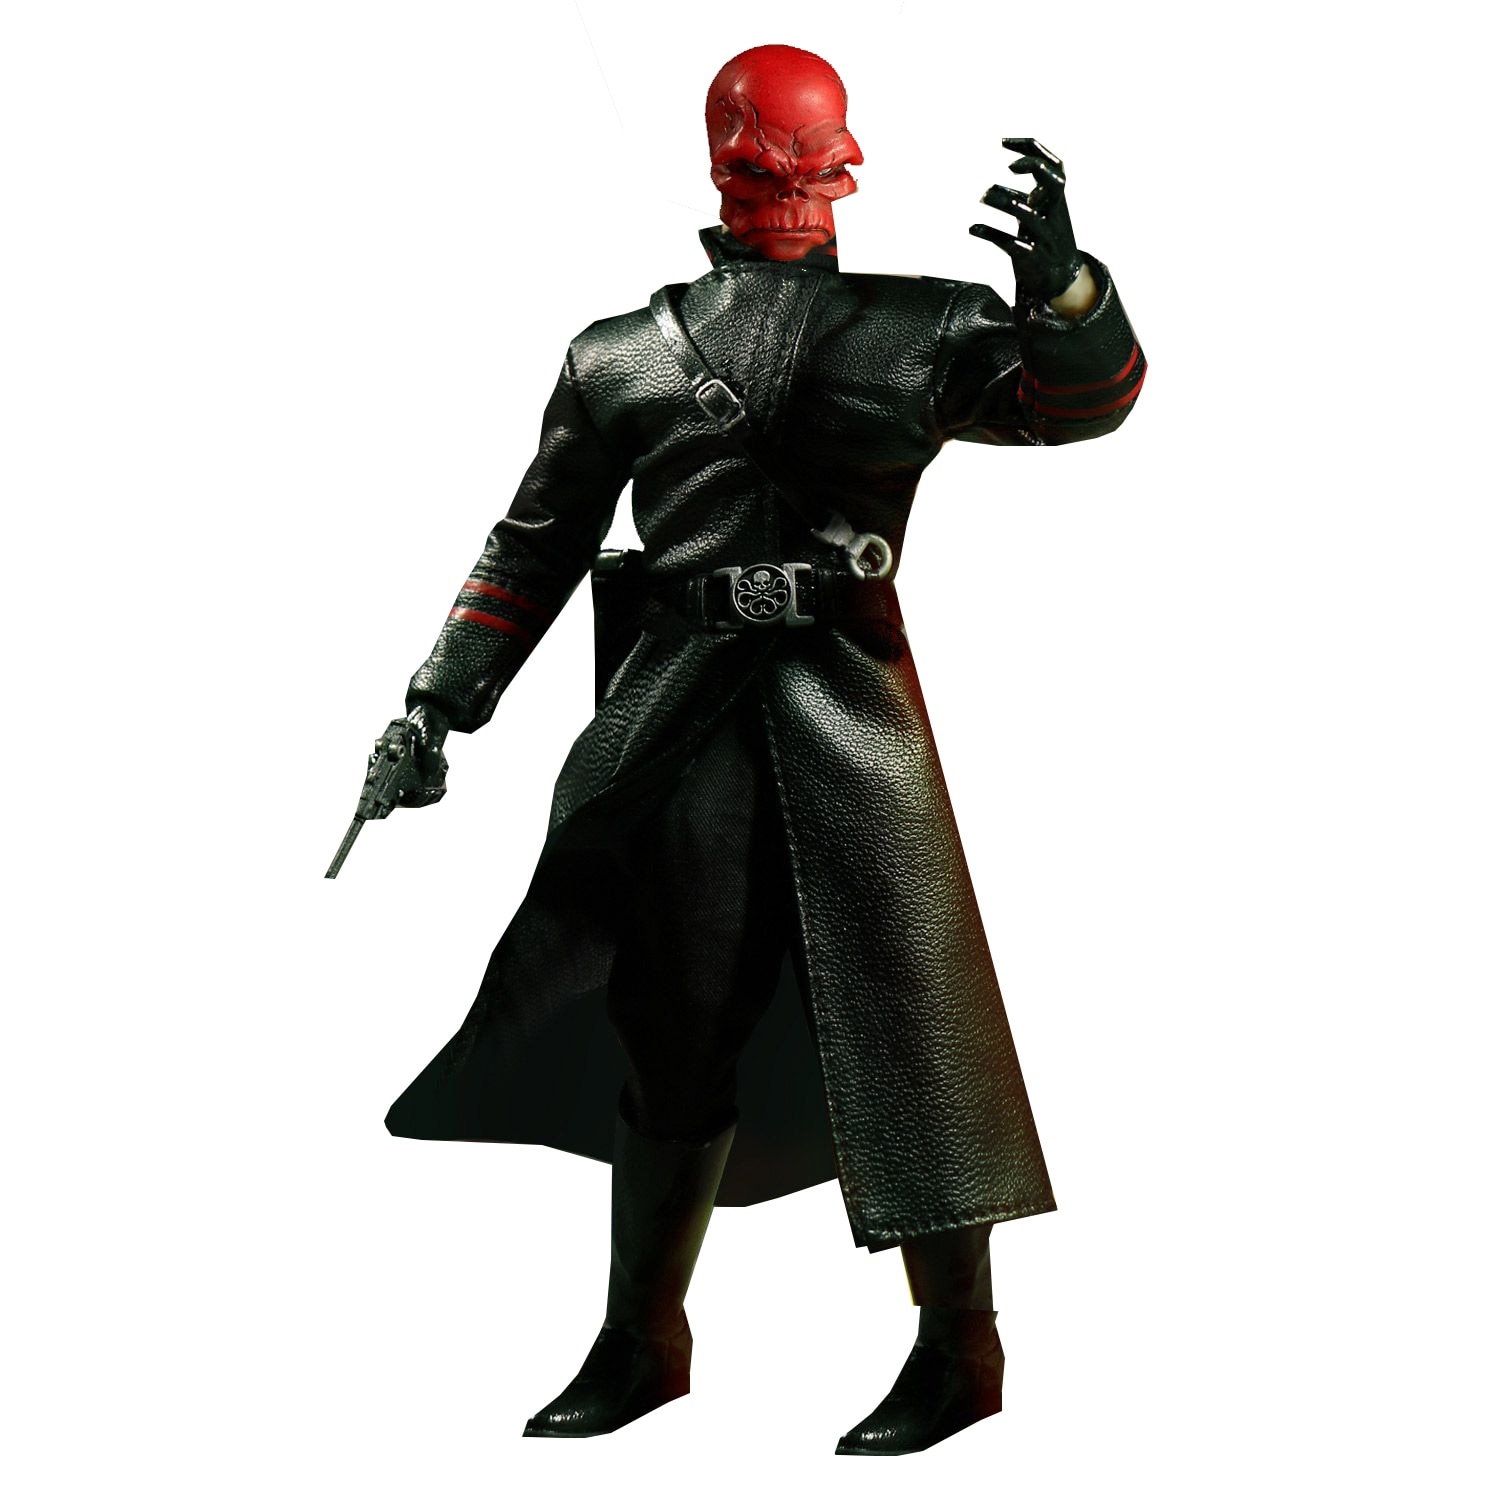 red skull action figure